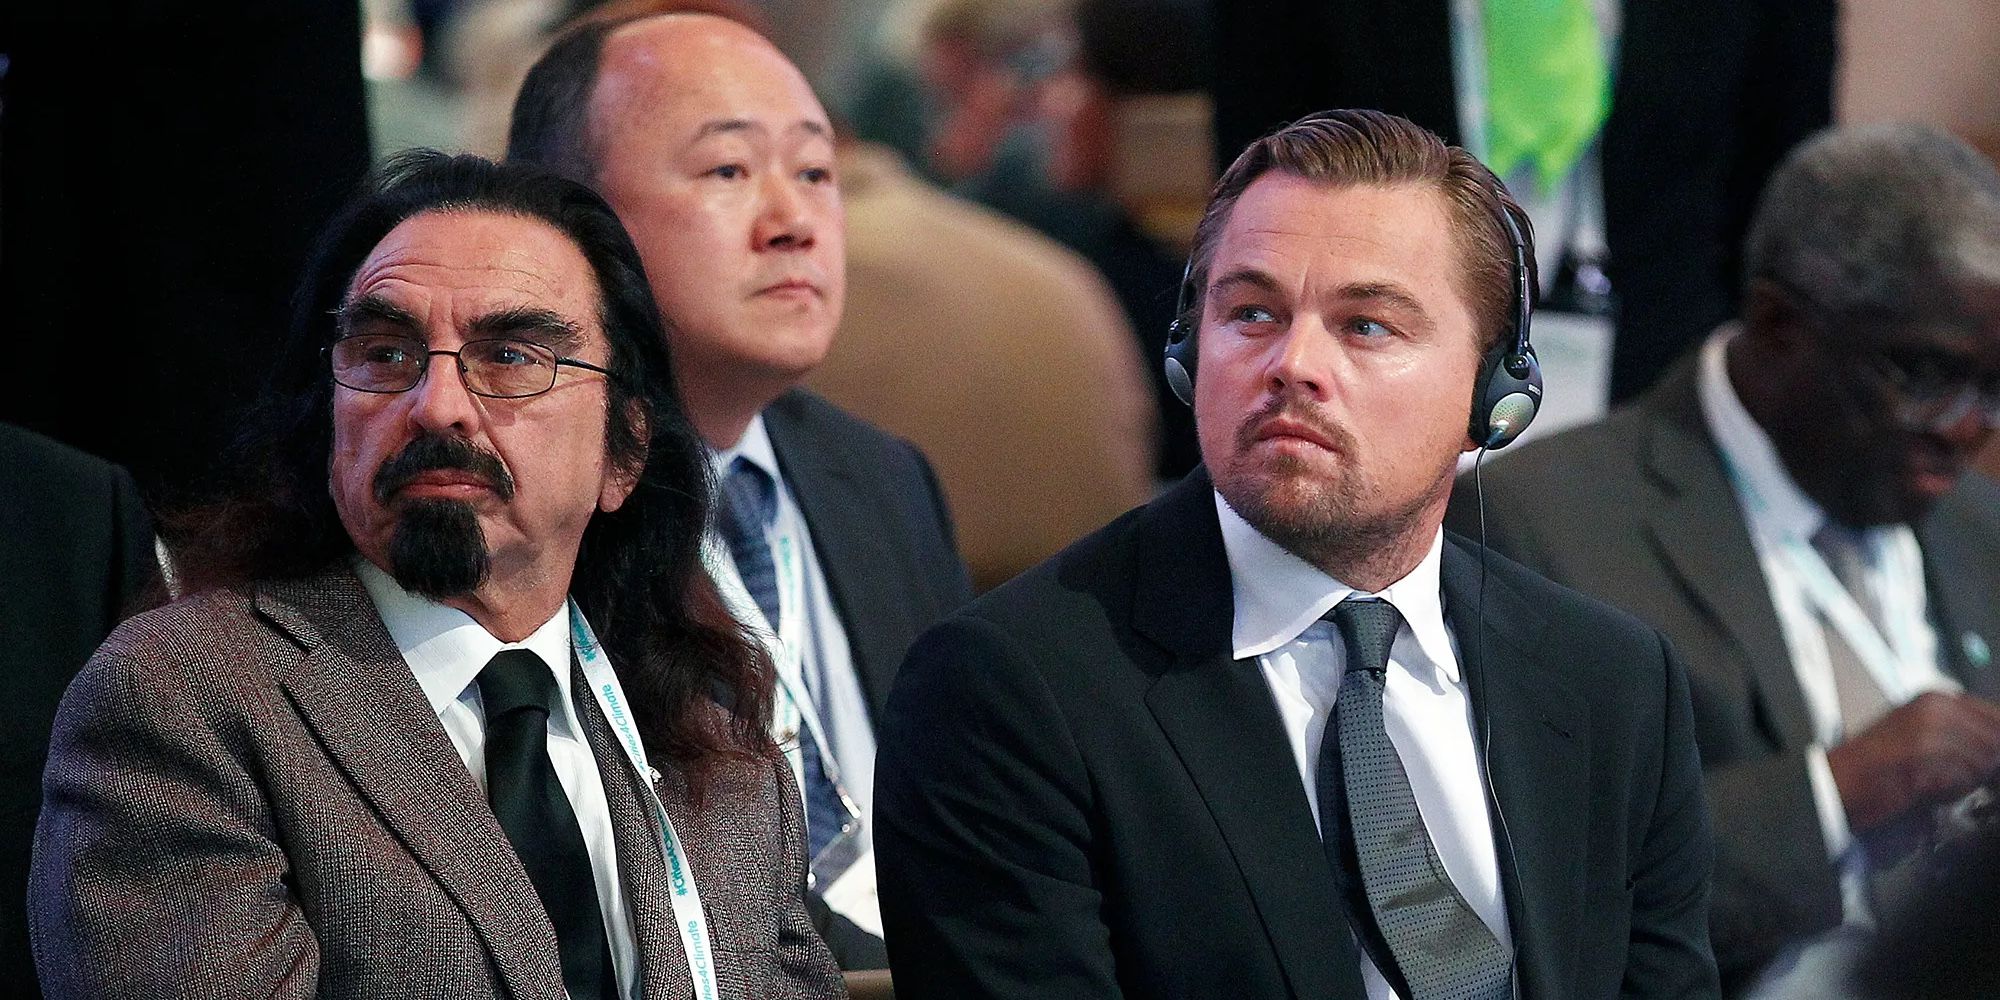 Leonardo and George DiCaprio sitting at an event